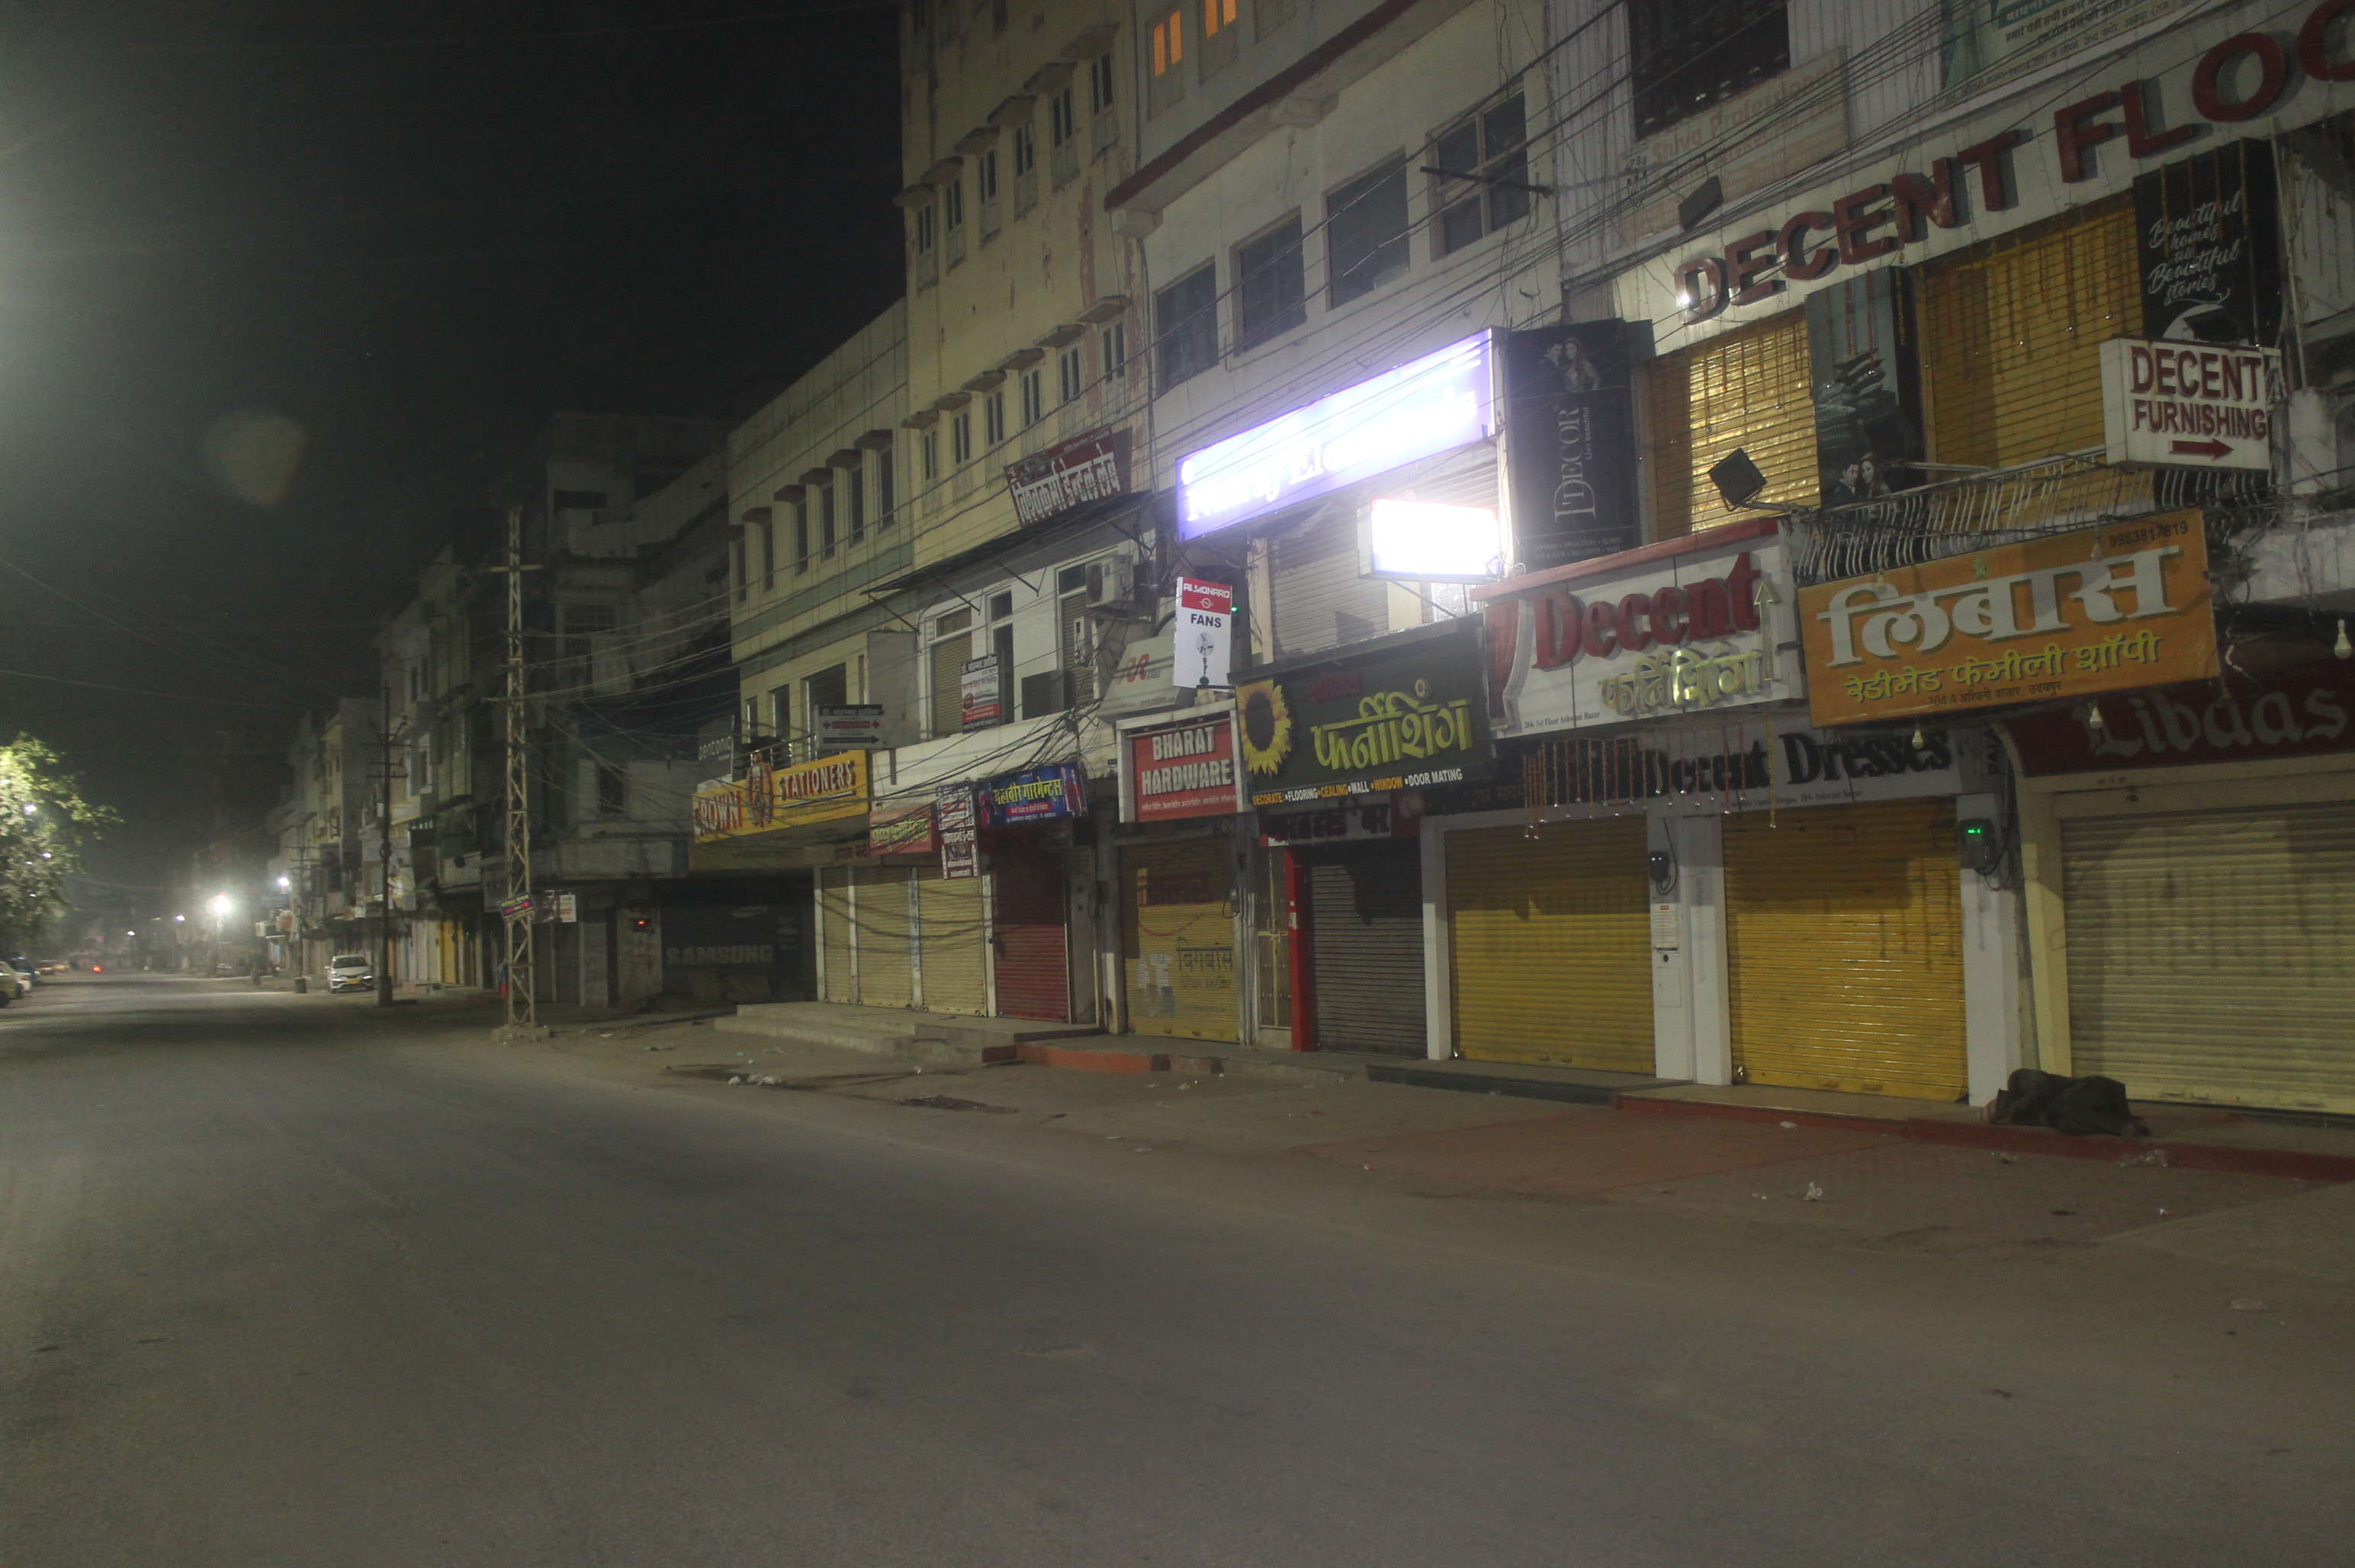 [PHOTOS] 8PM public and market restrictions begin in Udaipur - roads silent once again